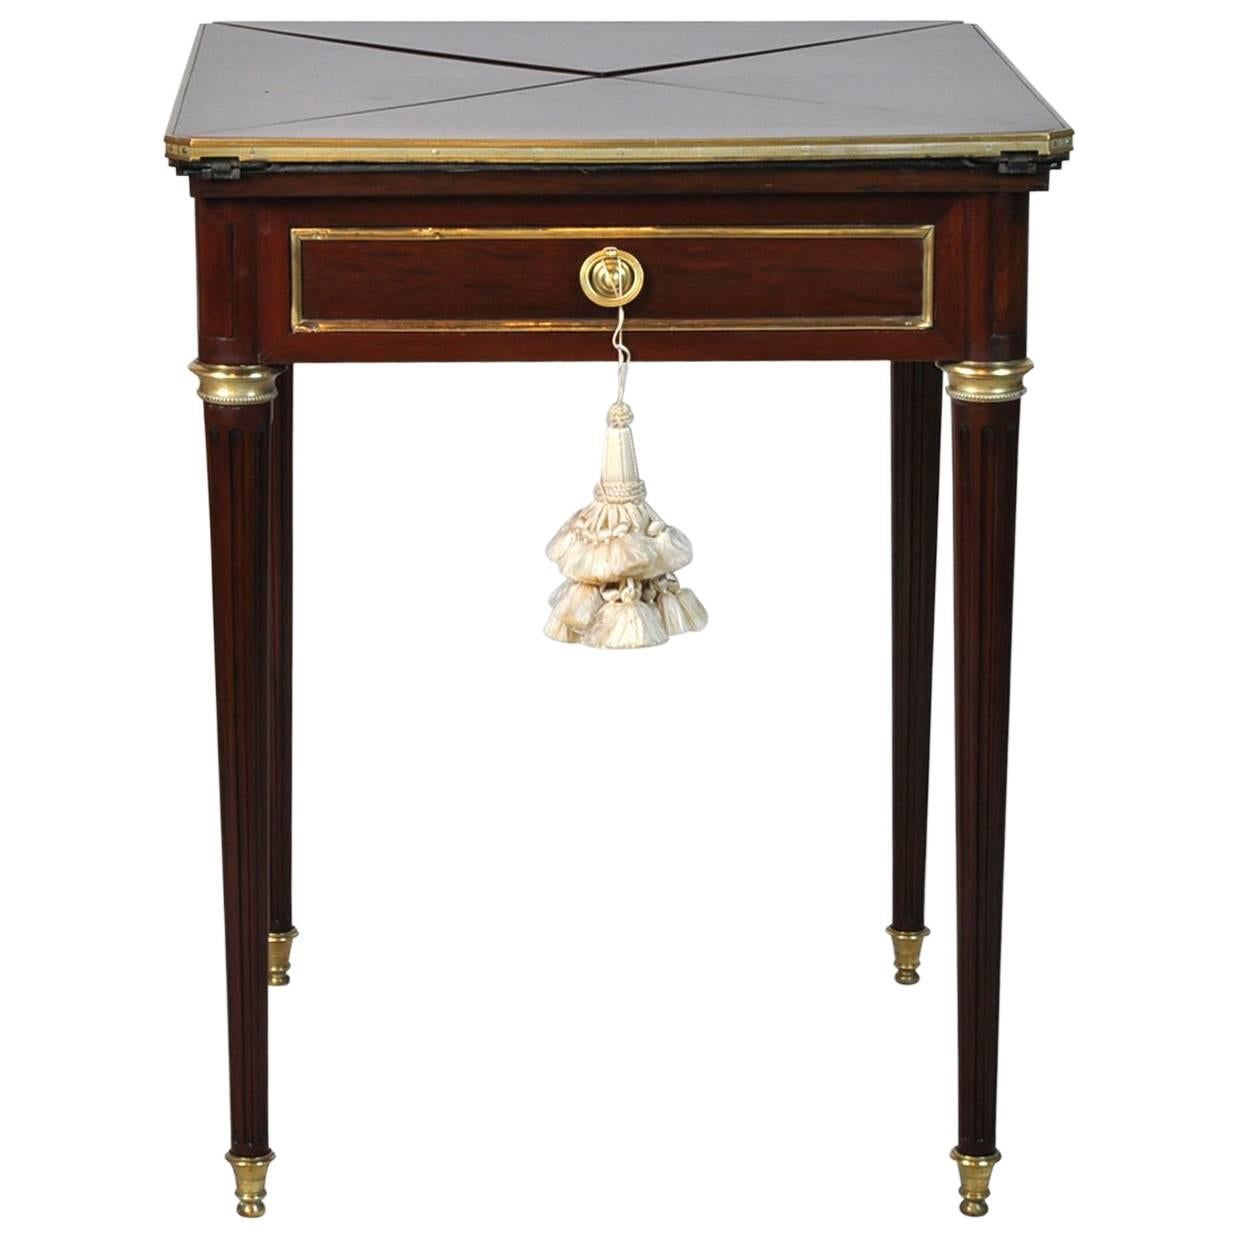 French Louis XVI Style Two-Drawer Handkerchief Game Table with Felt Interior